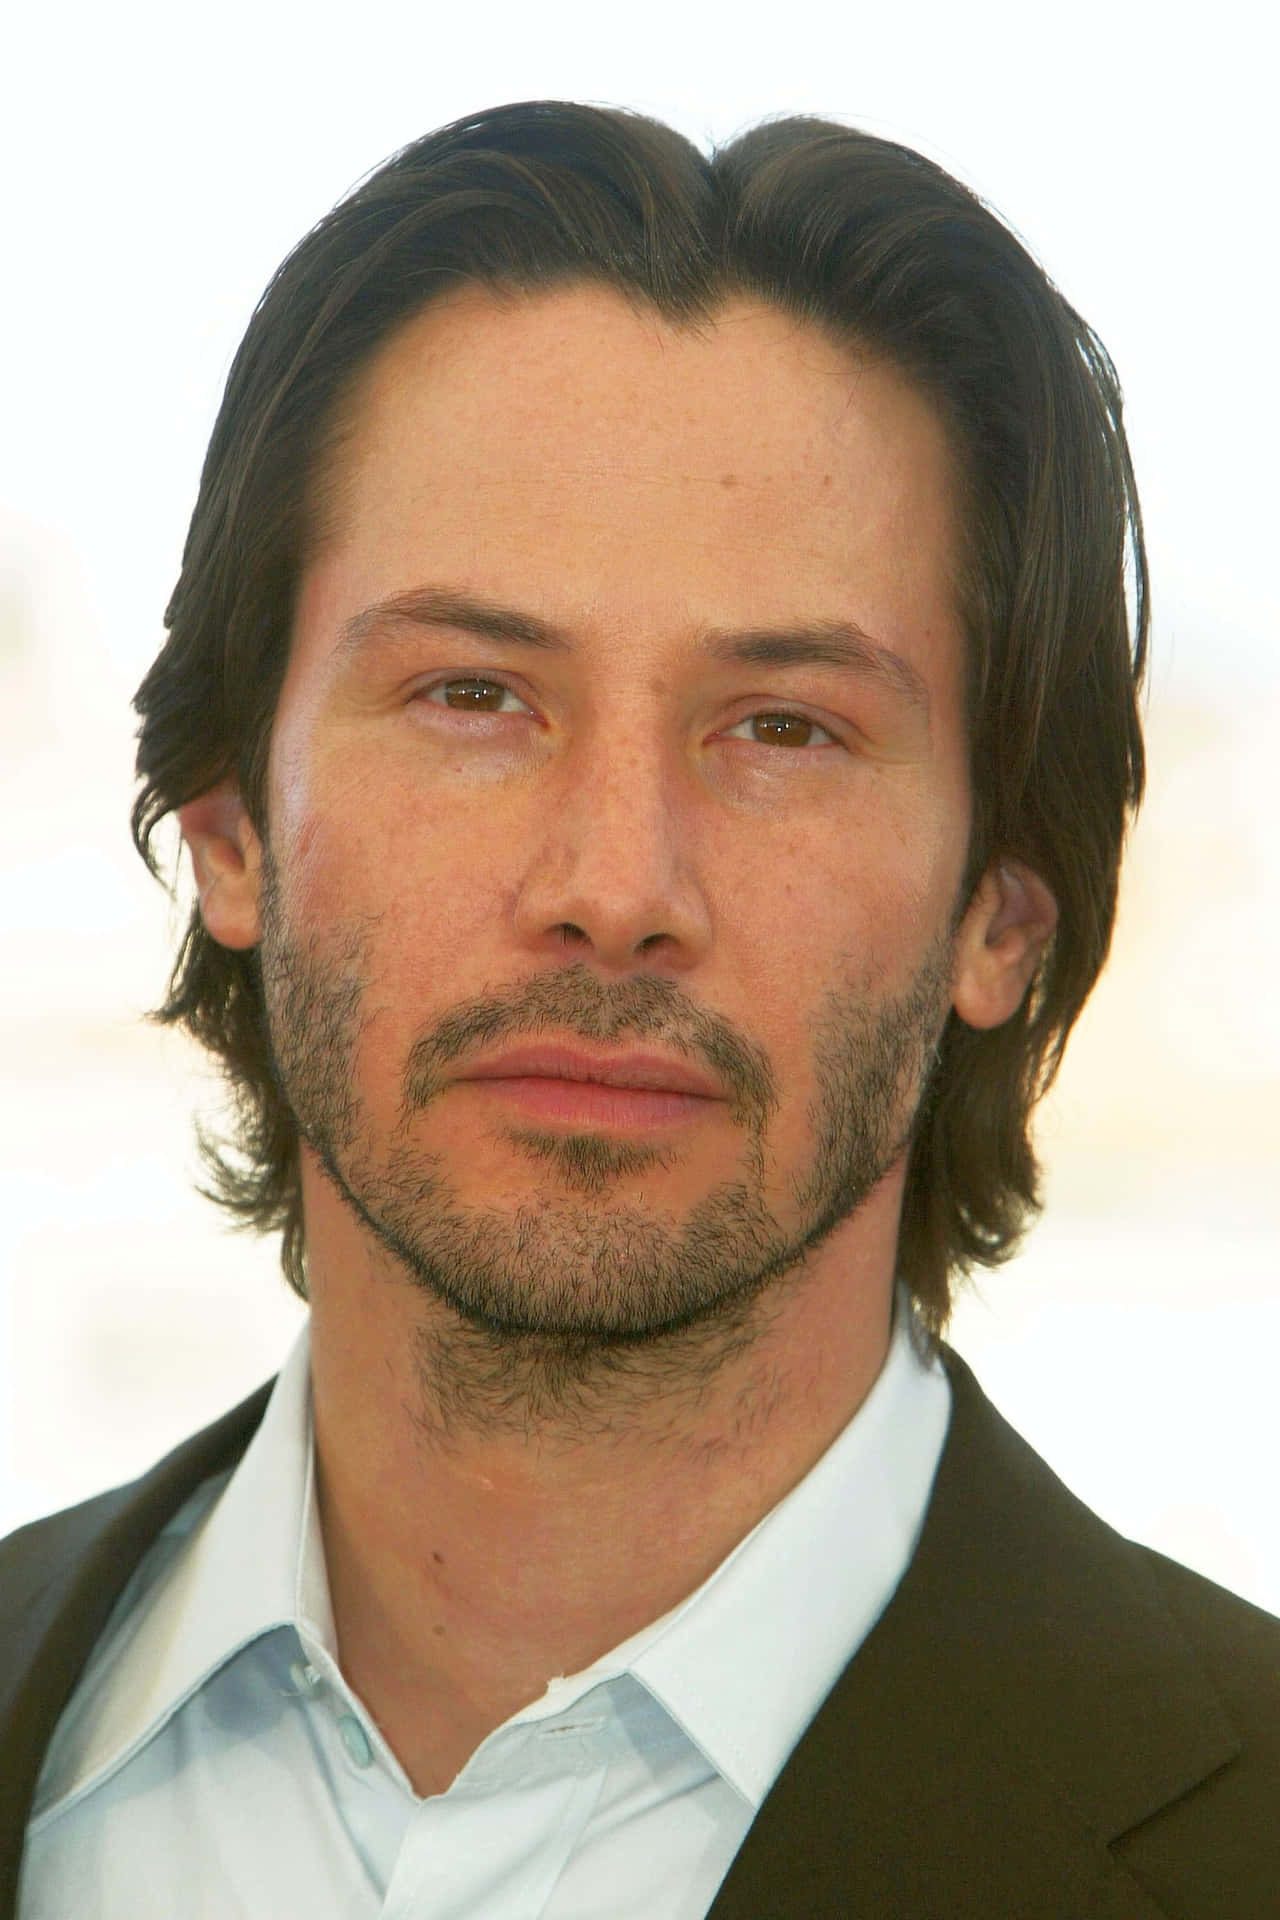 Keanu Reeves in a casual yet fashionable attire